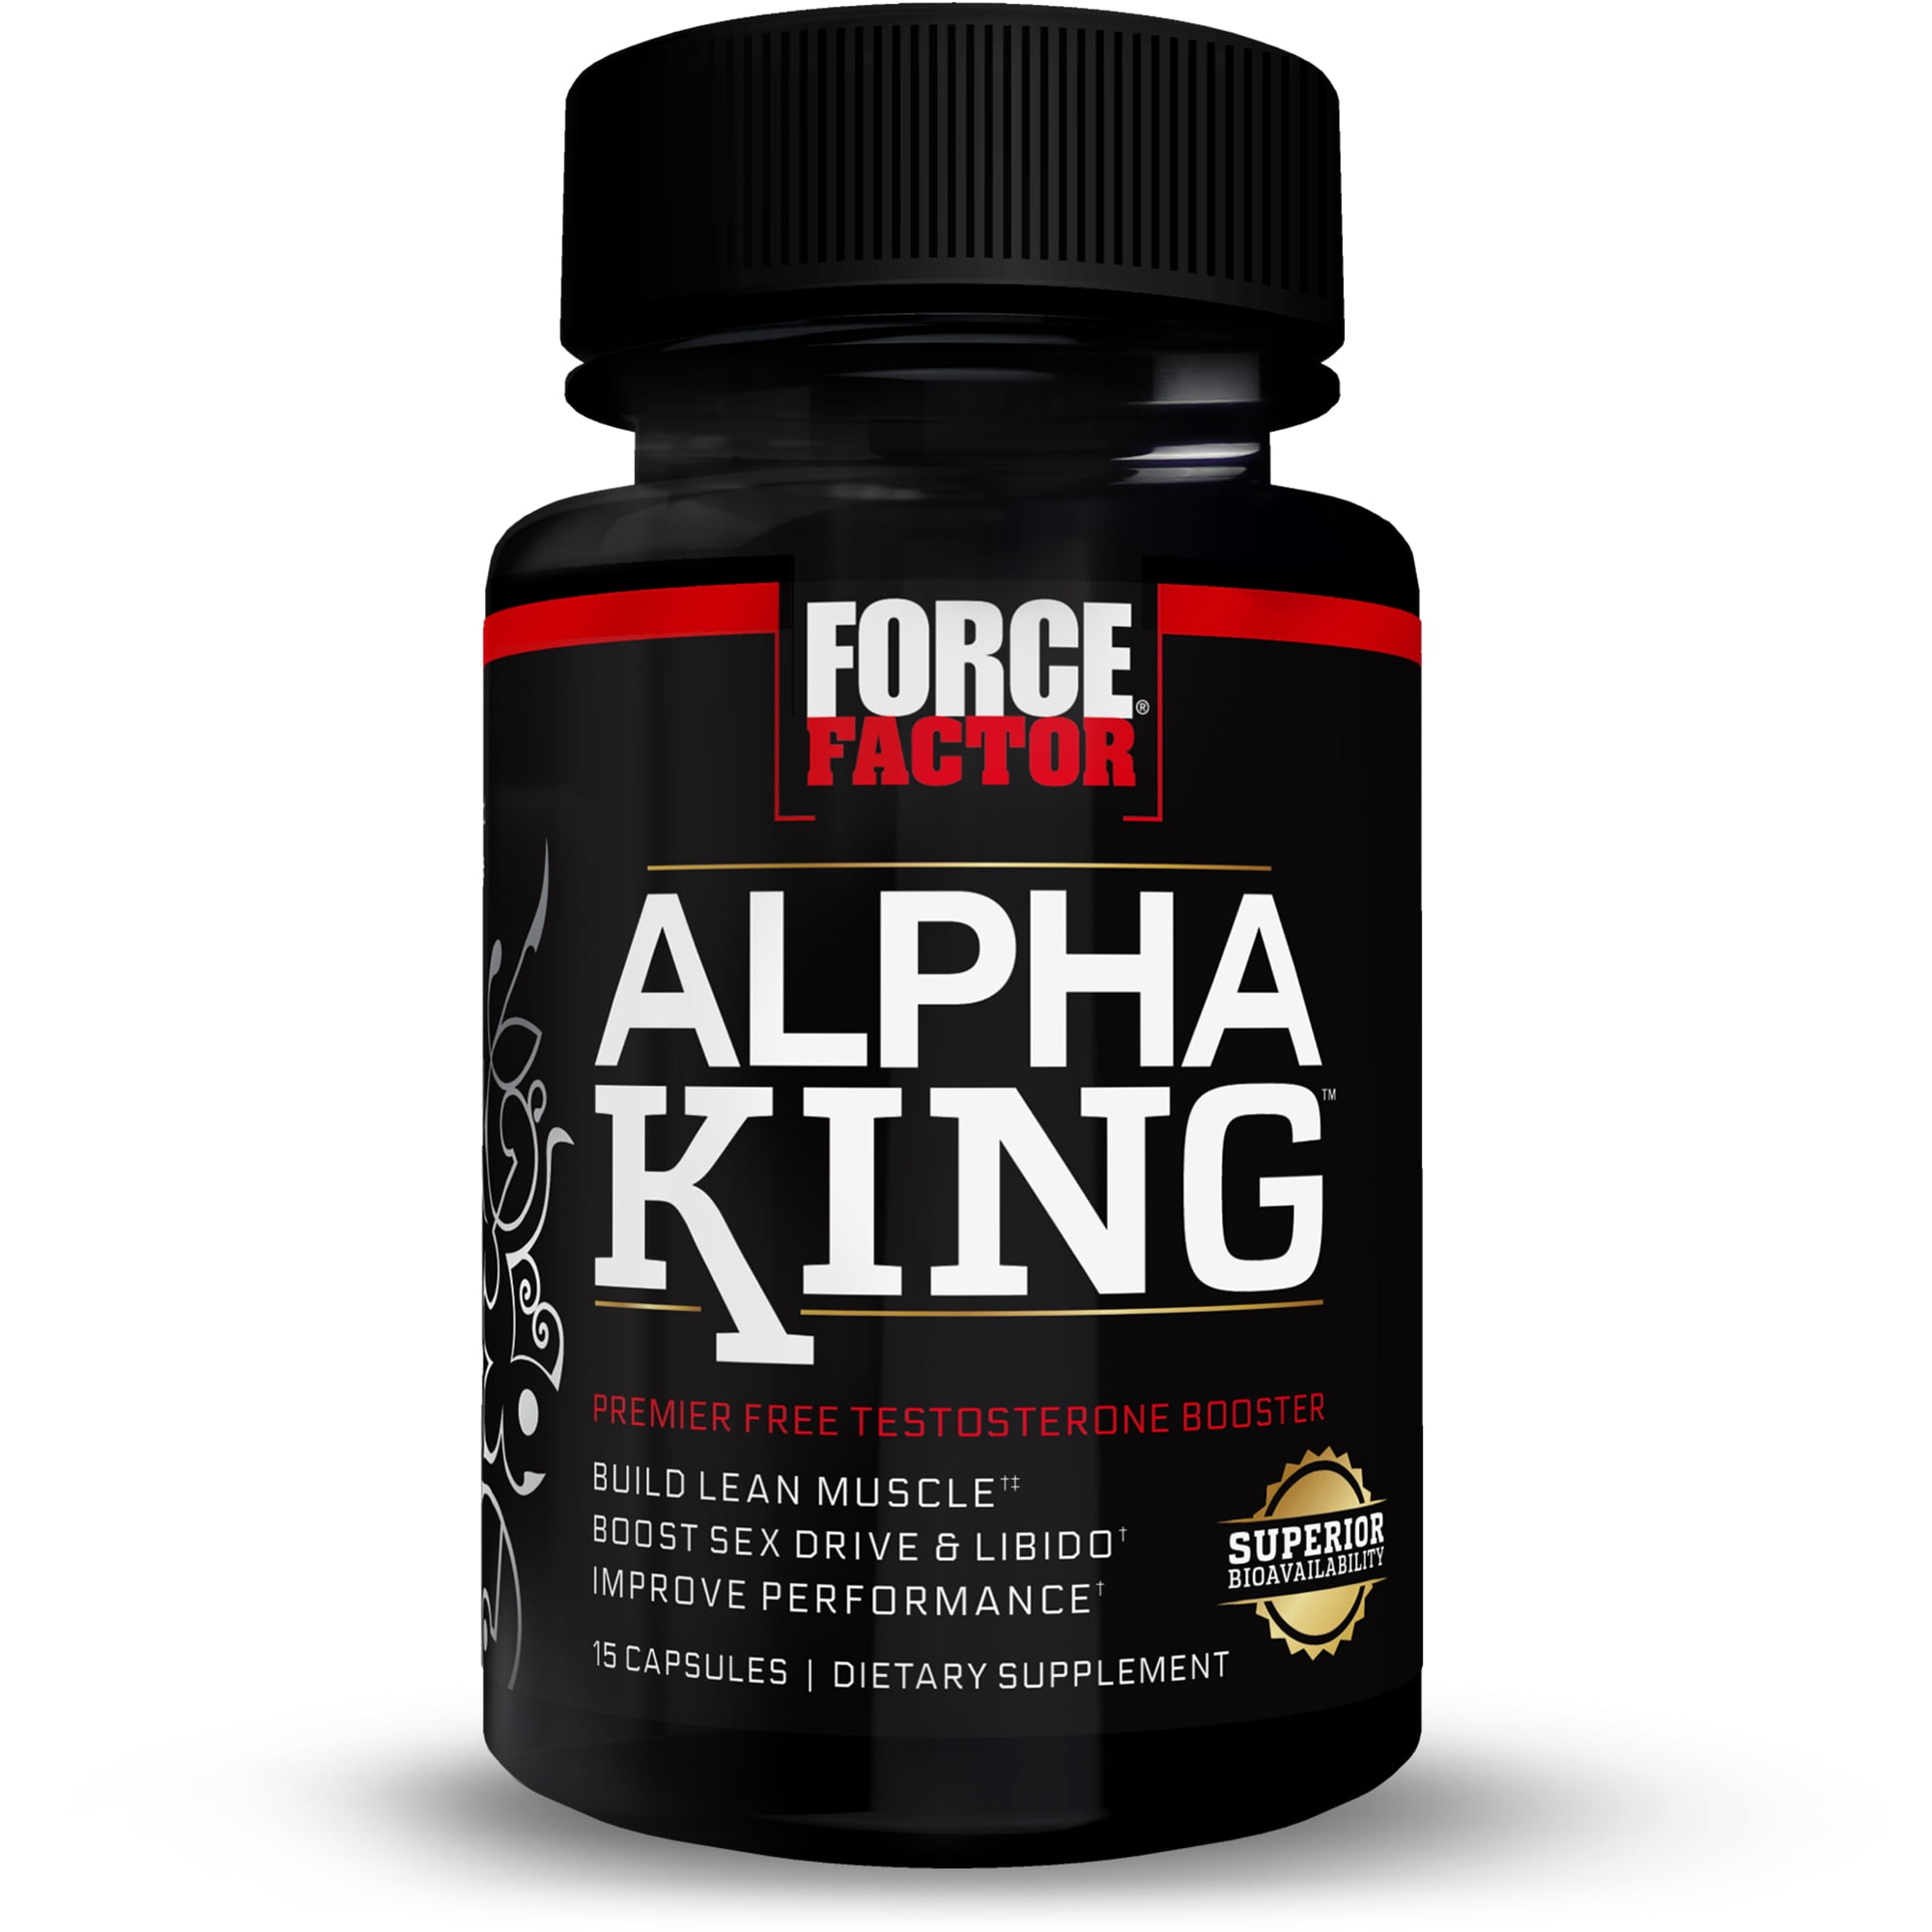 Alpha King Total Testosterone Booster Supplement for Men with Fenugreek  Seed, Black Maca, and Tribulus to Build Lean Muscle, Boost Libido, and  Improve Performance, Force Factor, 15 Capsules 